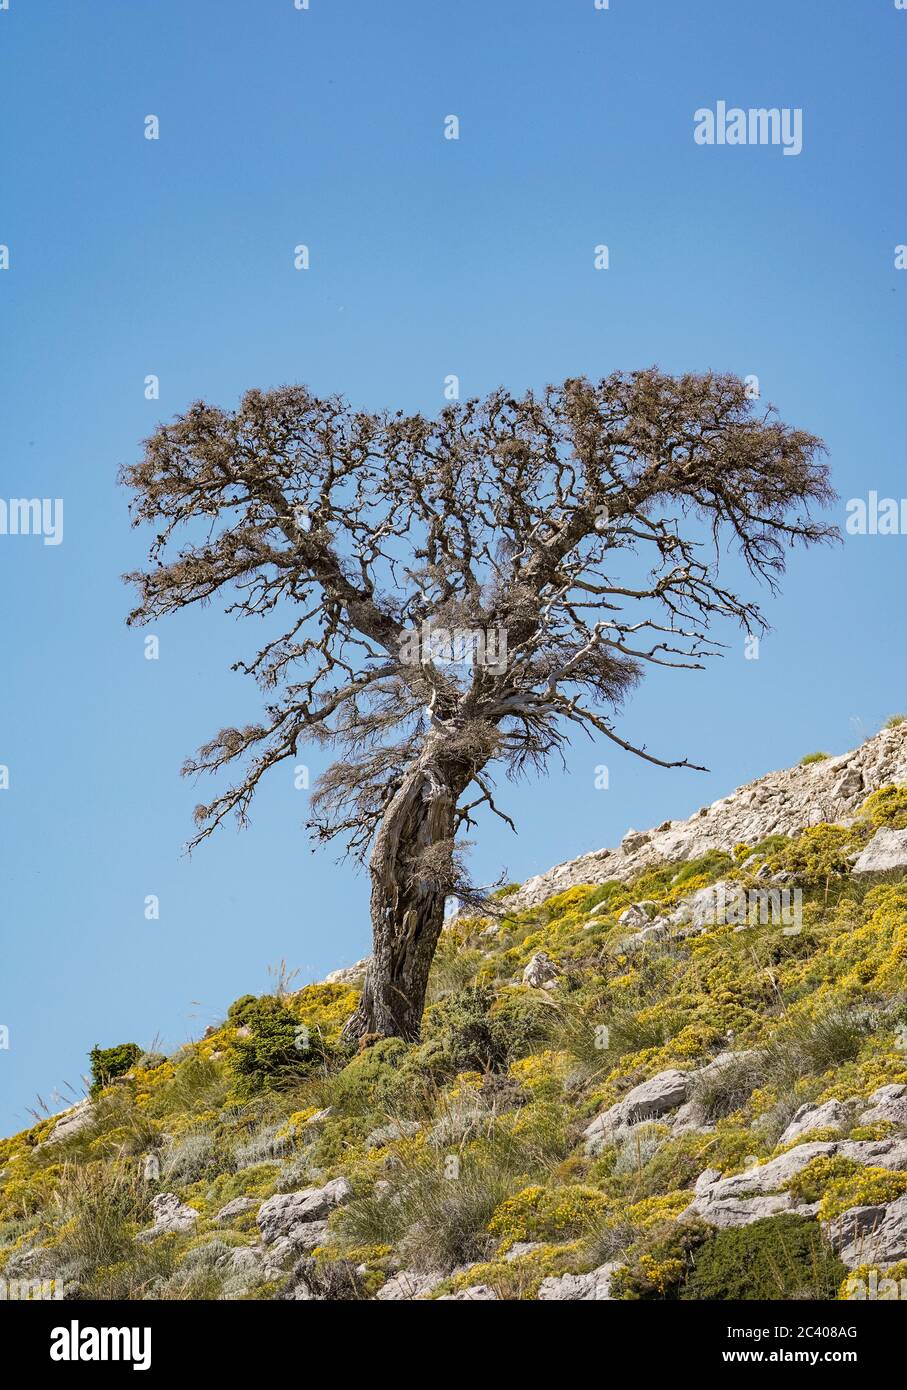 Sierra de las Nieves Natural Park, Old dead spanish fir tree (Abies pinsapo)  Biosphere Reserve., Malaga province. Andalusia, Southern Spain. Europe. Stock Photo